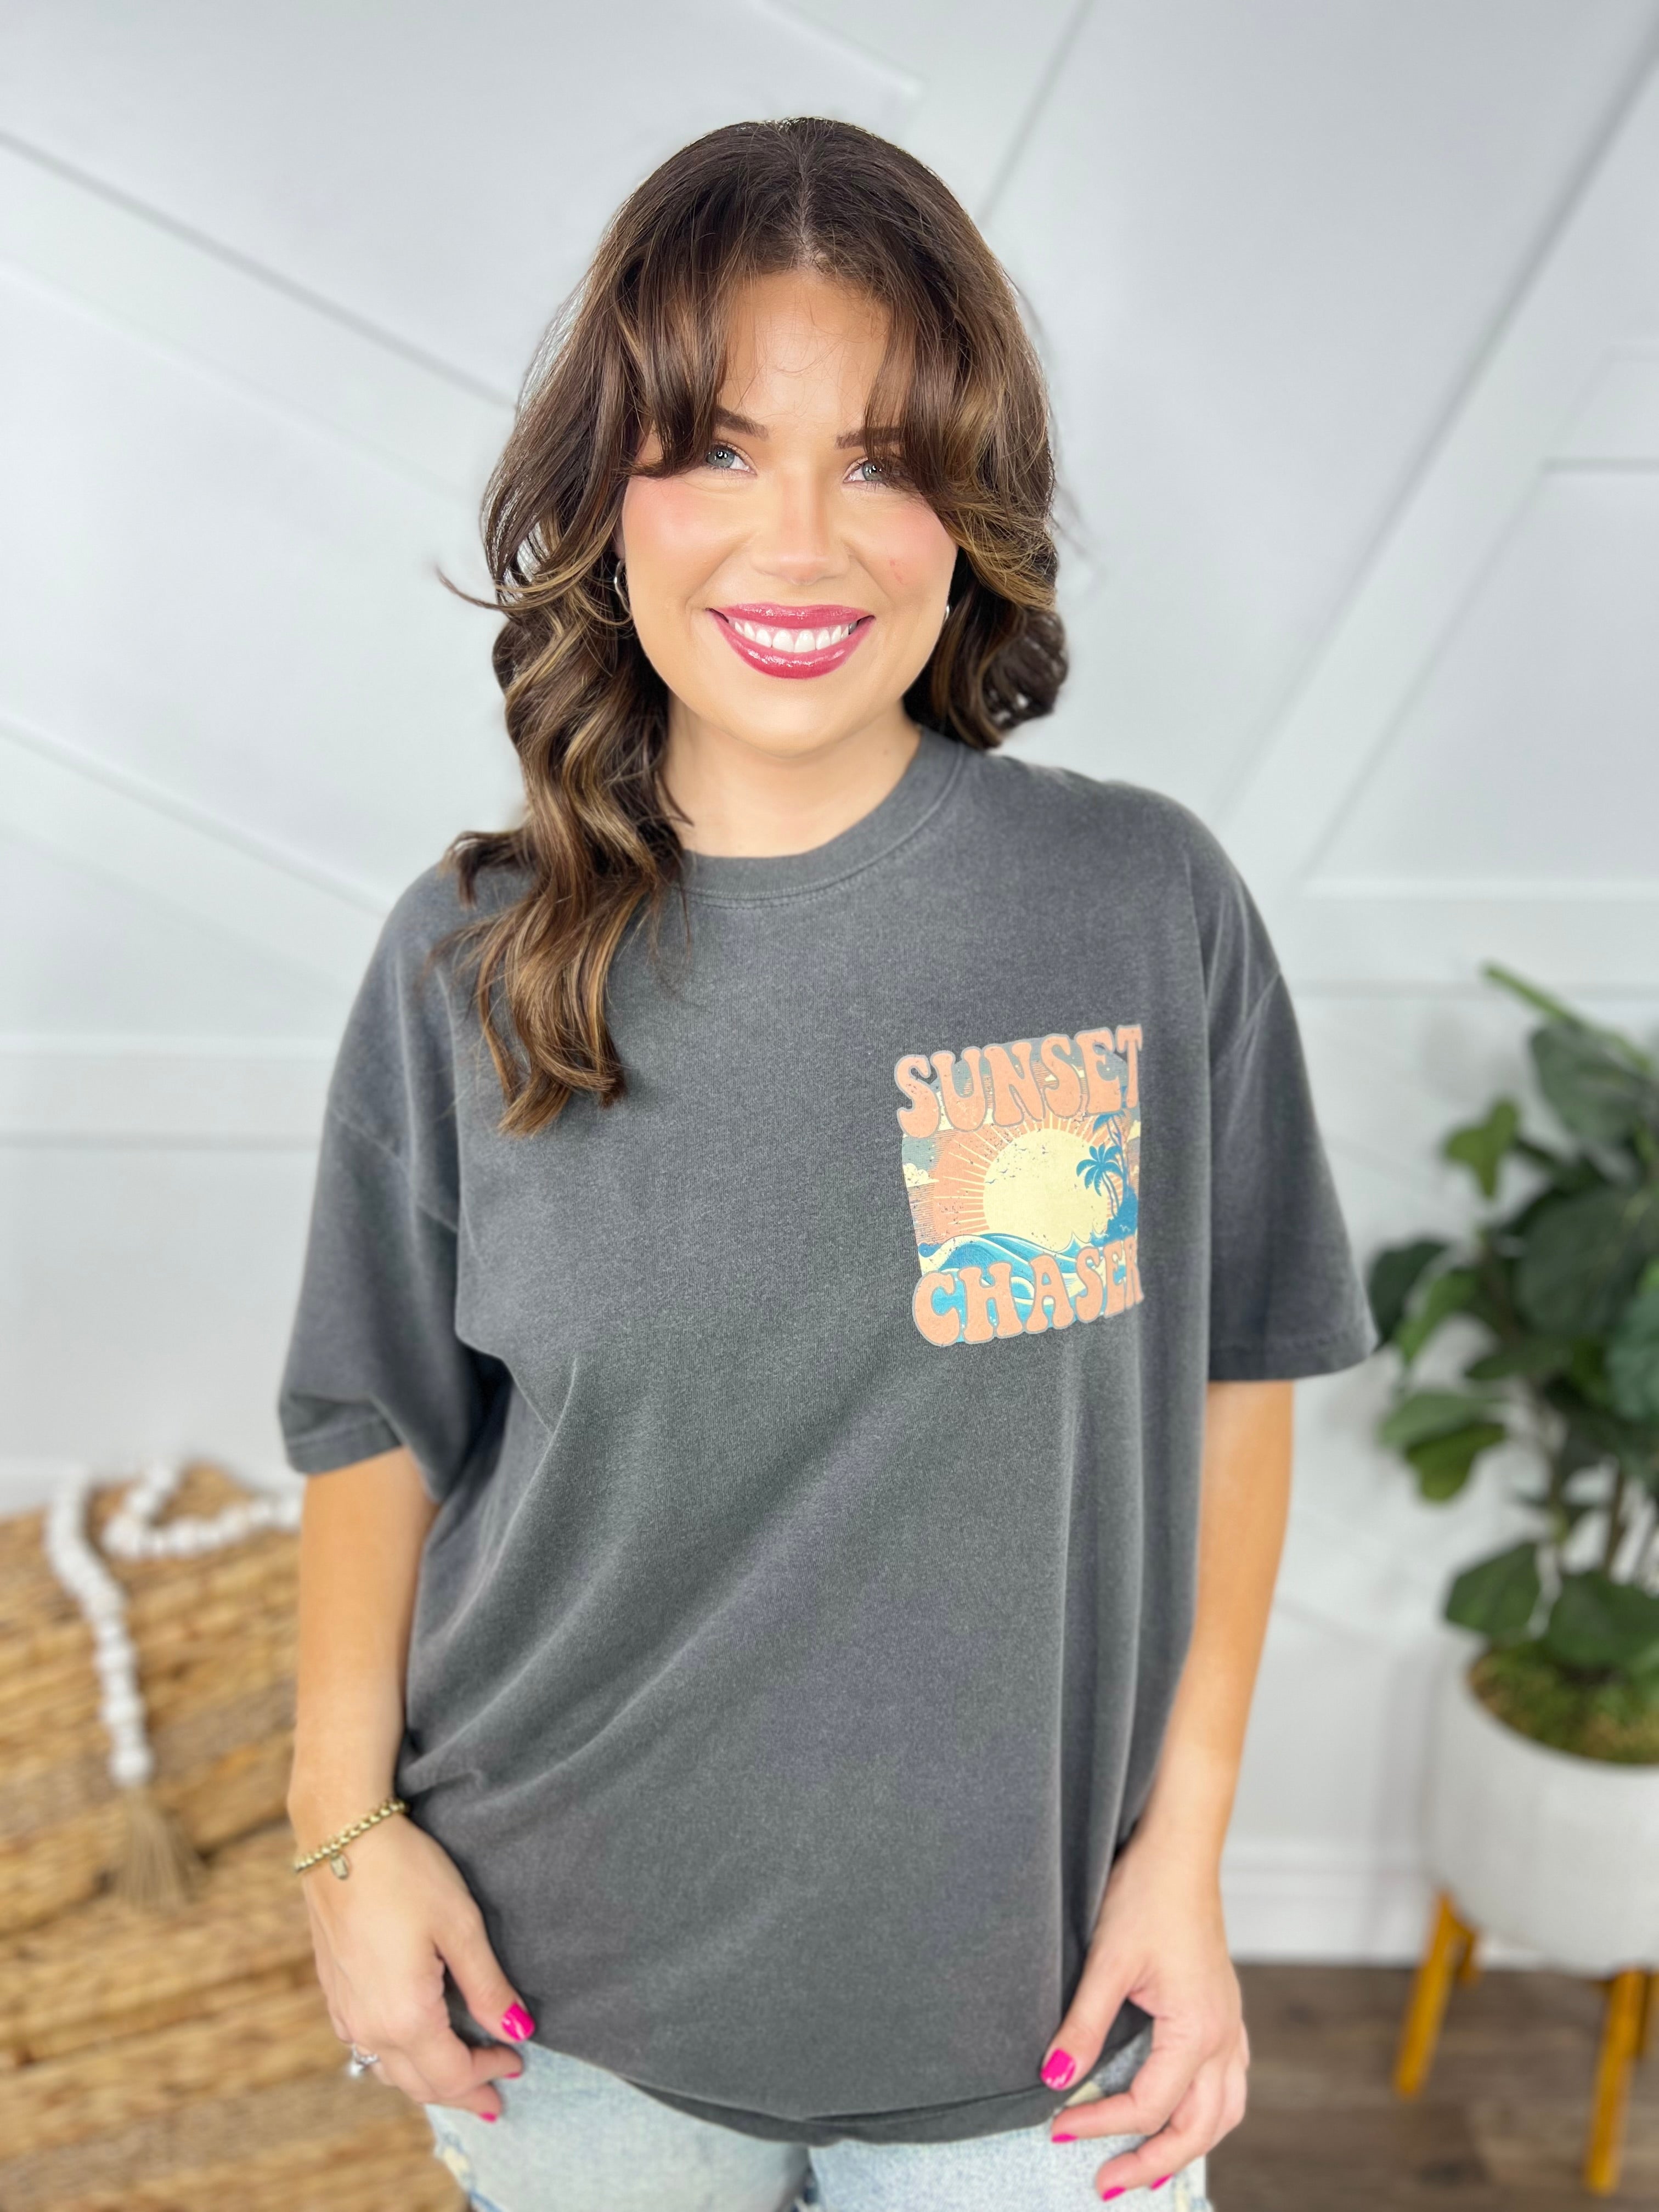 Busy Chasing Sunsets Graphic Tee-130 Graphic Tees-Heathered Boho-Heathered Boho Boutique, Women's Fashion and Accessories in Palmetto, FL